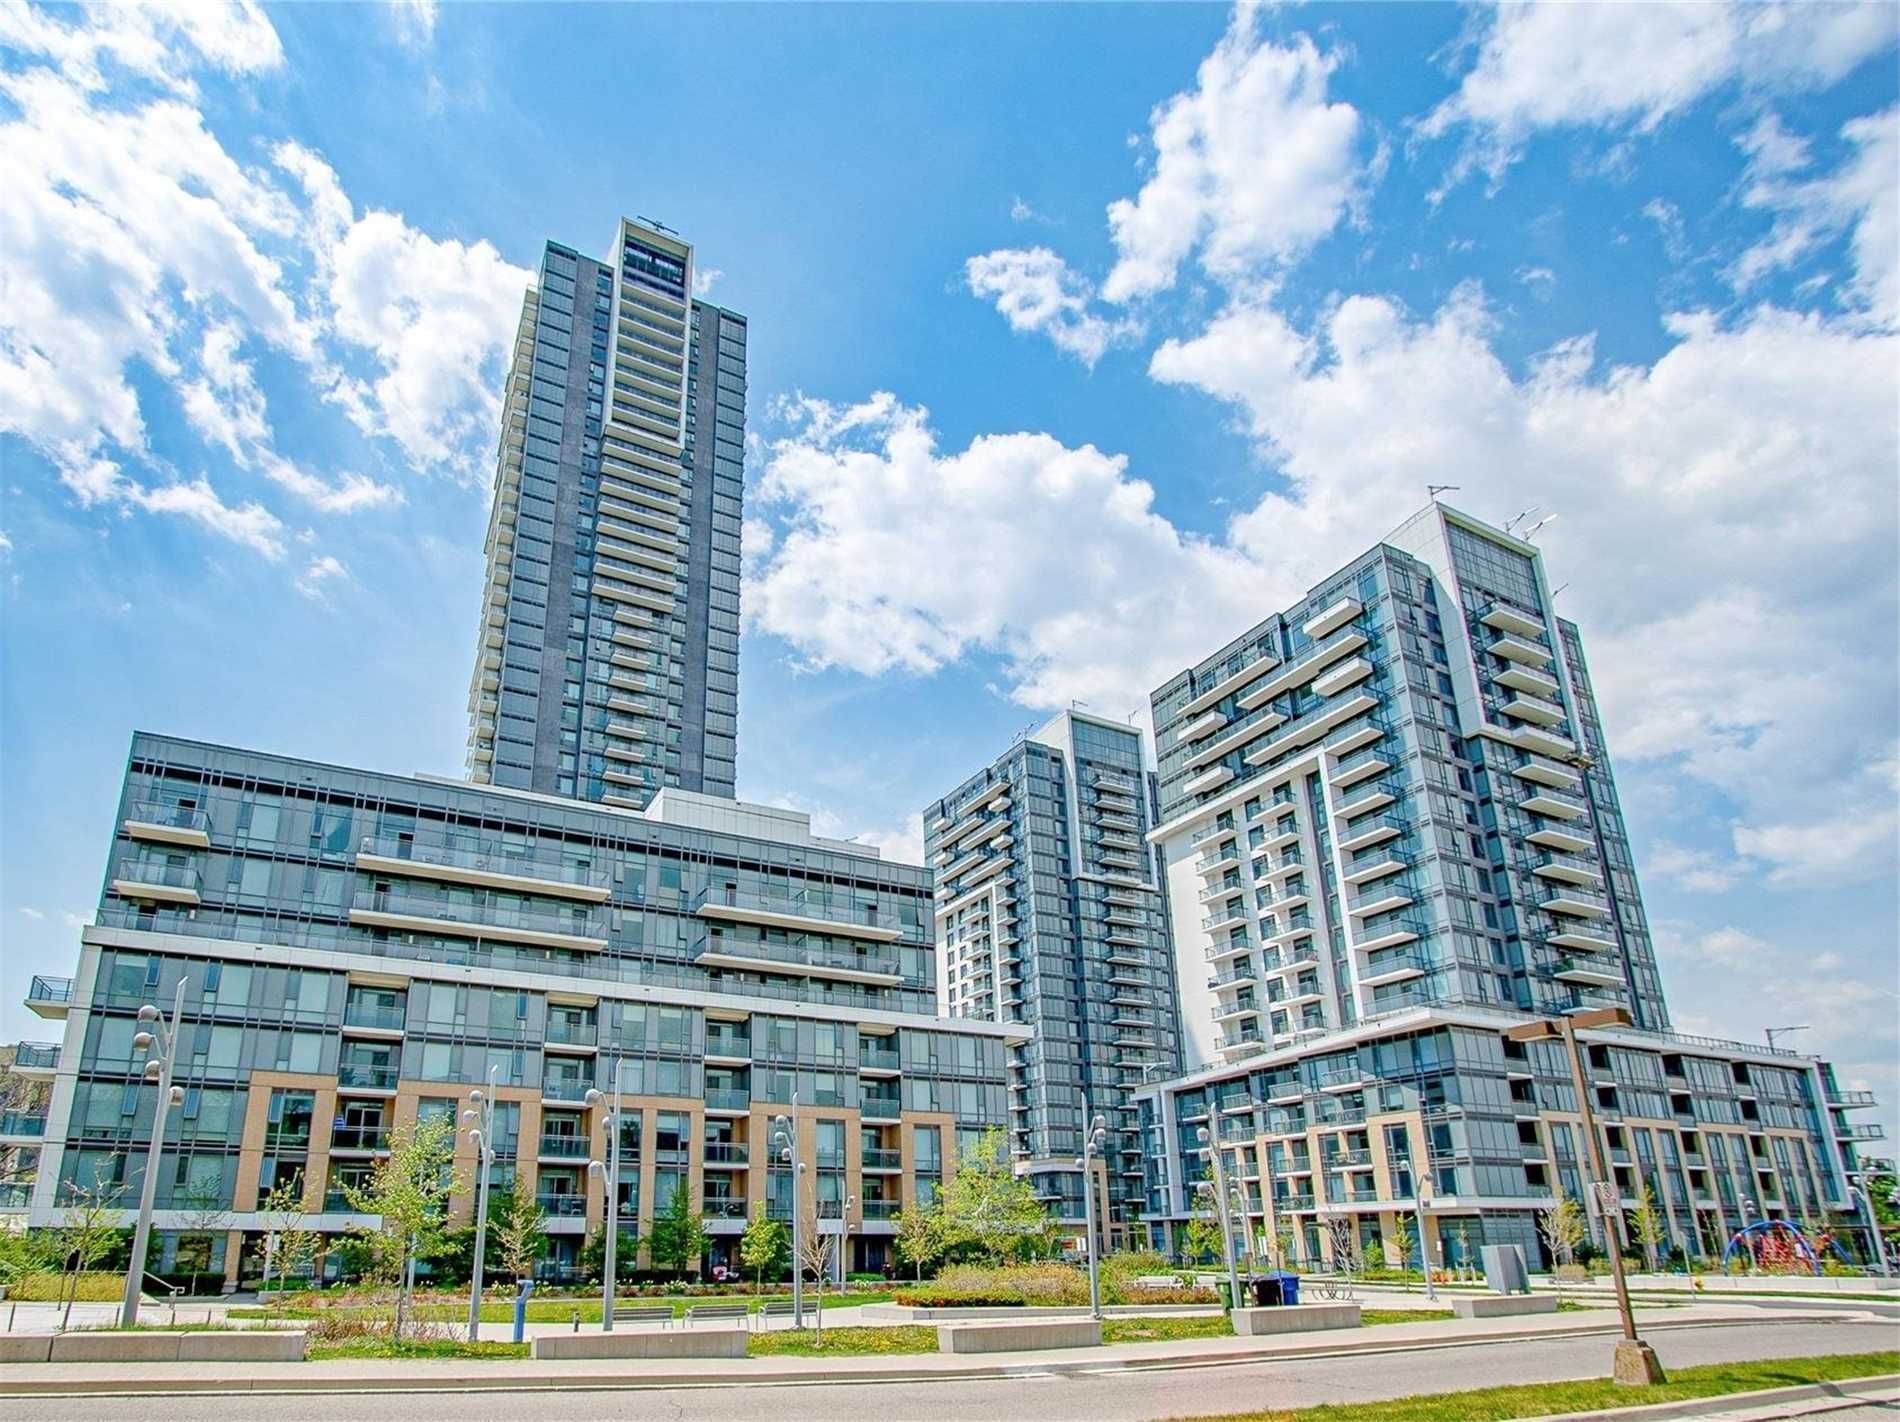 50 Ann O'Reilly Rd. This condo at Parfait at Atria is located in  North York, Toronto - image #1 of 2 by Strata.ca